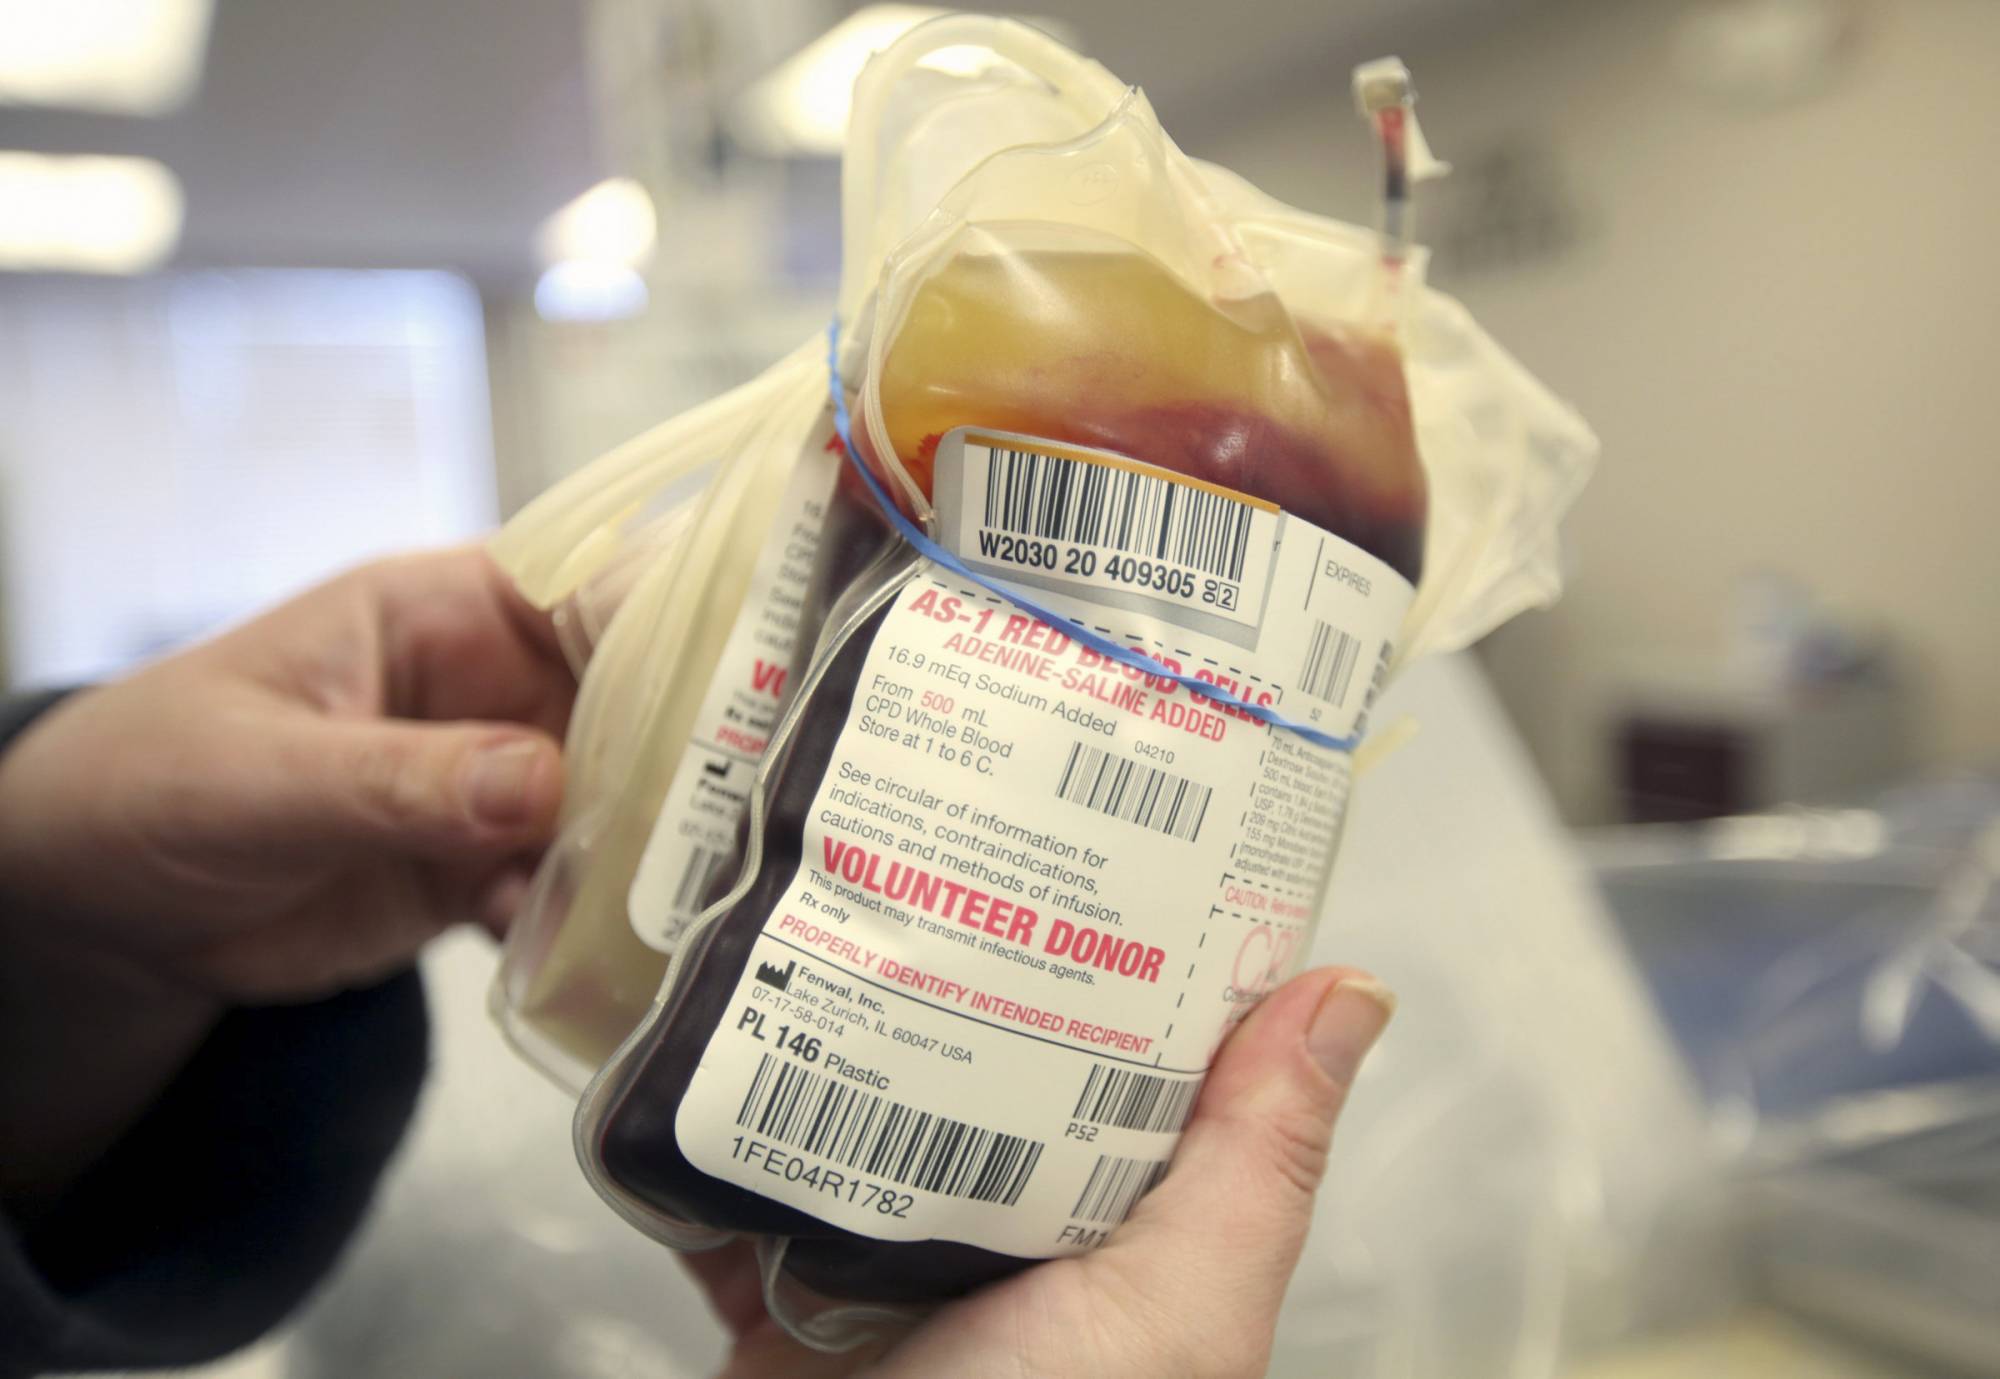 This Monday, March 9, 2020 file photo shows a packet of donated blood at The American Red Cross donation center in Scranton, Pa. On Friday, March 13, 2020, The Associated Press reported on stories circulating online incorrectly asserting that if you don’t have health insurance and can’t afford to take a $3,200 test for the COVID-19 coronavirus, donate blood because screeners must test donors for the virus. “We do a whole range of testing on blood donations as required by the FDA, but screening or testing for coronavirus is not happening,” said Kate Fry, chief executive officer of America’s Blood Centers, a North American network of nonprofit blood centers. (Jake Danna Stevens/The Times-Tribune via AP)